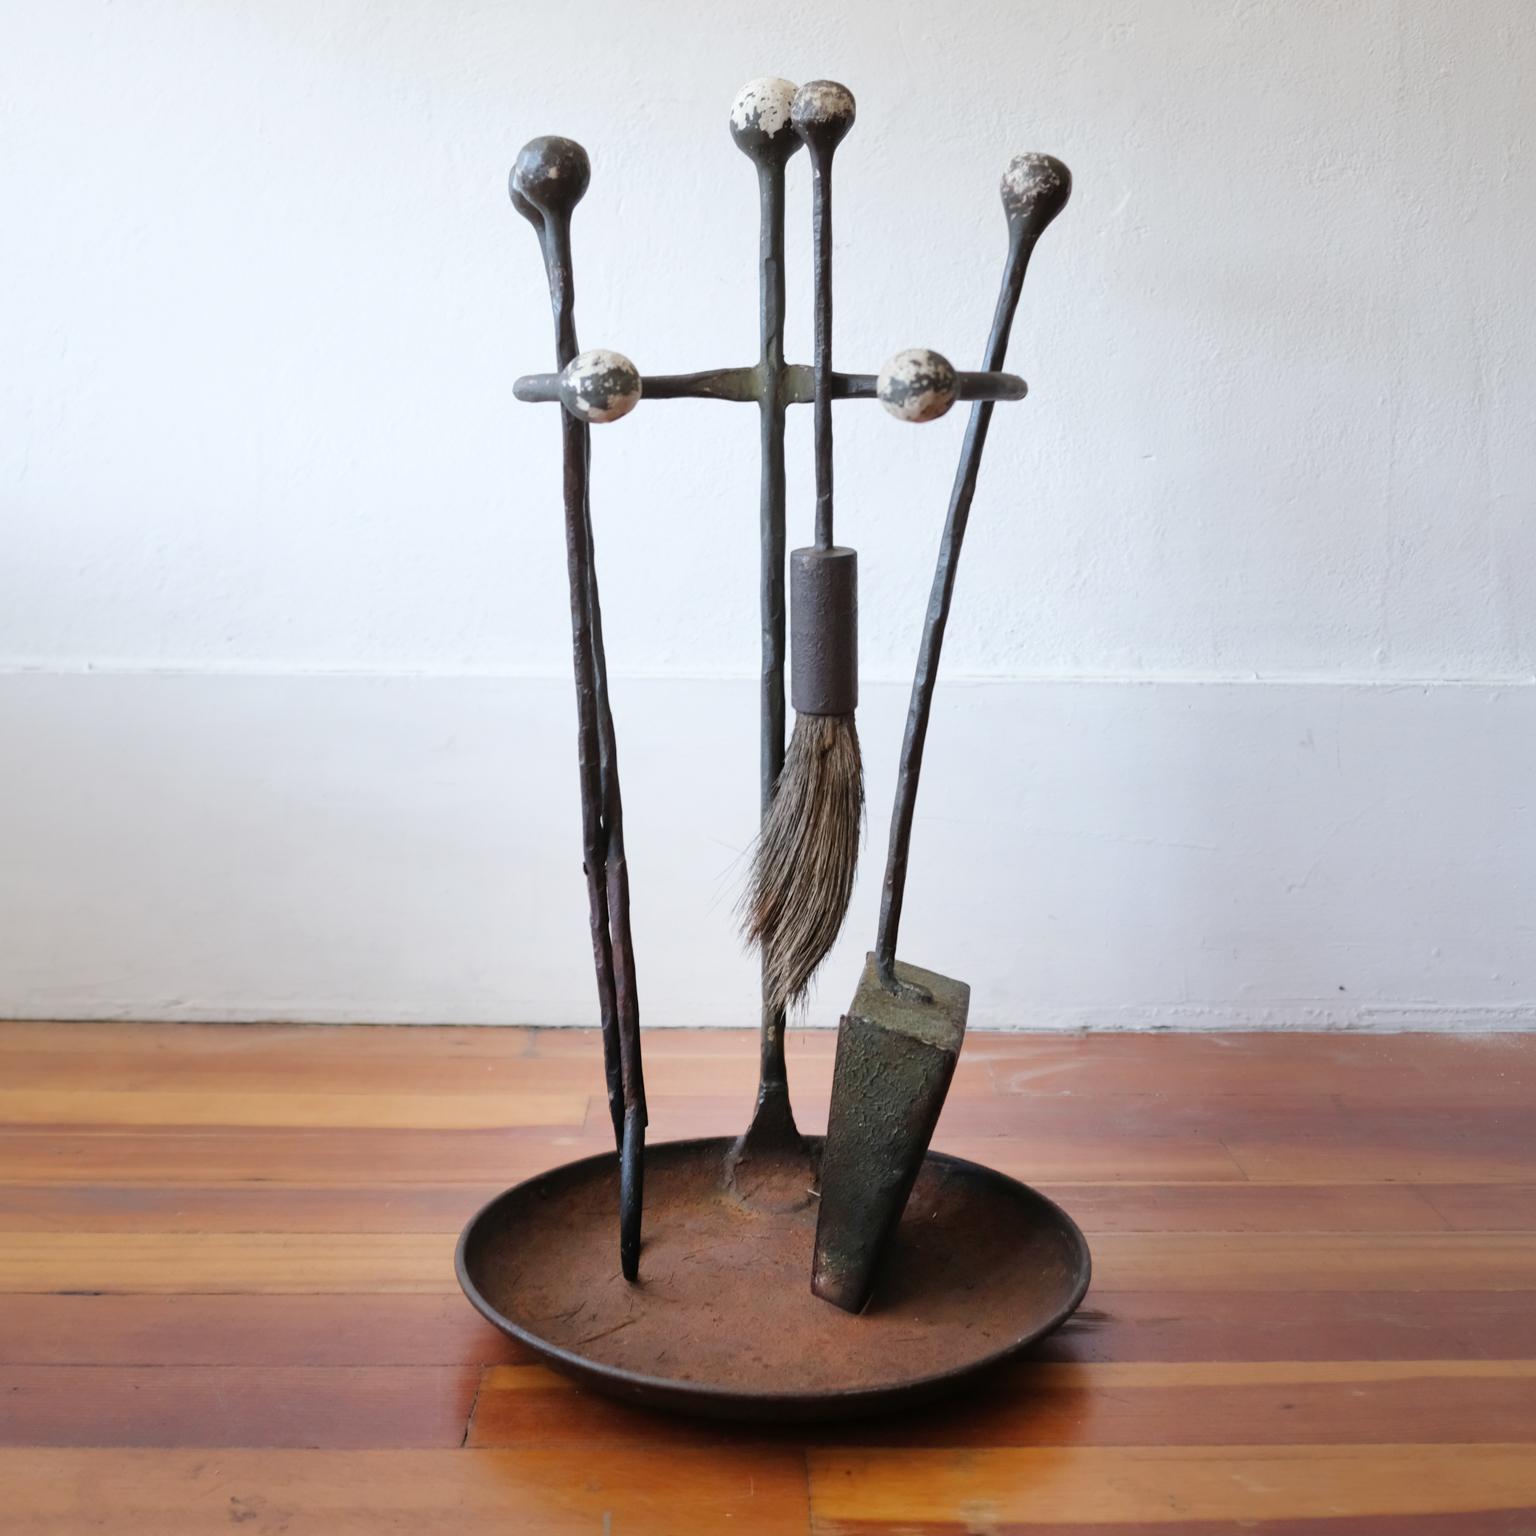 Hand-forged solid iron fire tools on a stand. Solid metal ball handles. Horse hair brush. Great wear and patina.